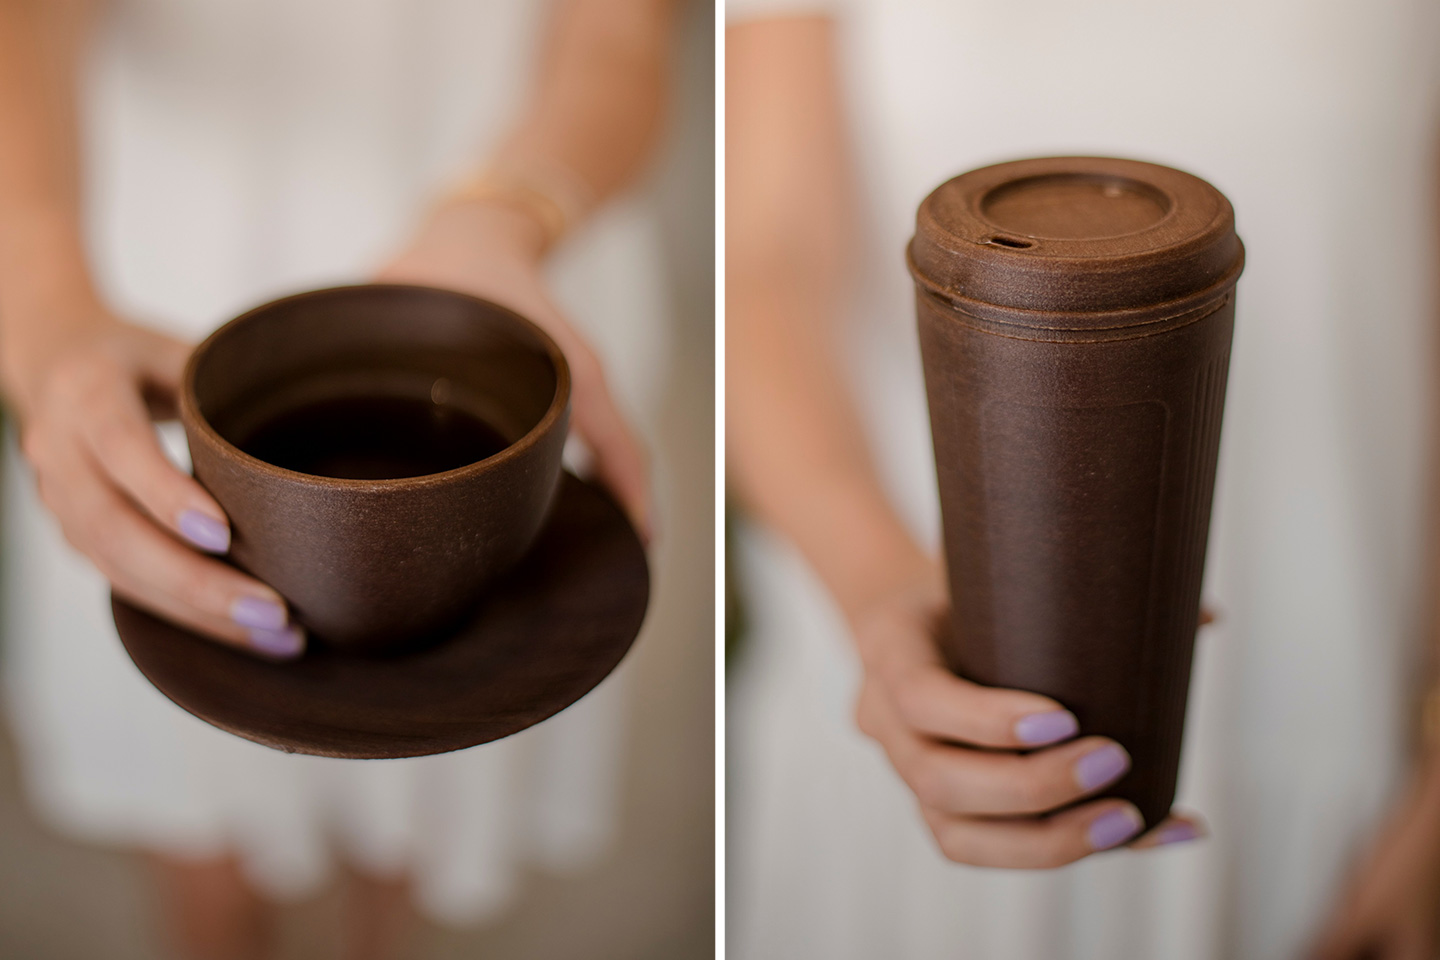 Reusable coffee cups made from recycled coffee waste + more